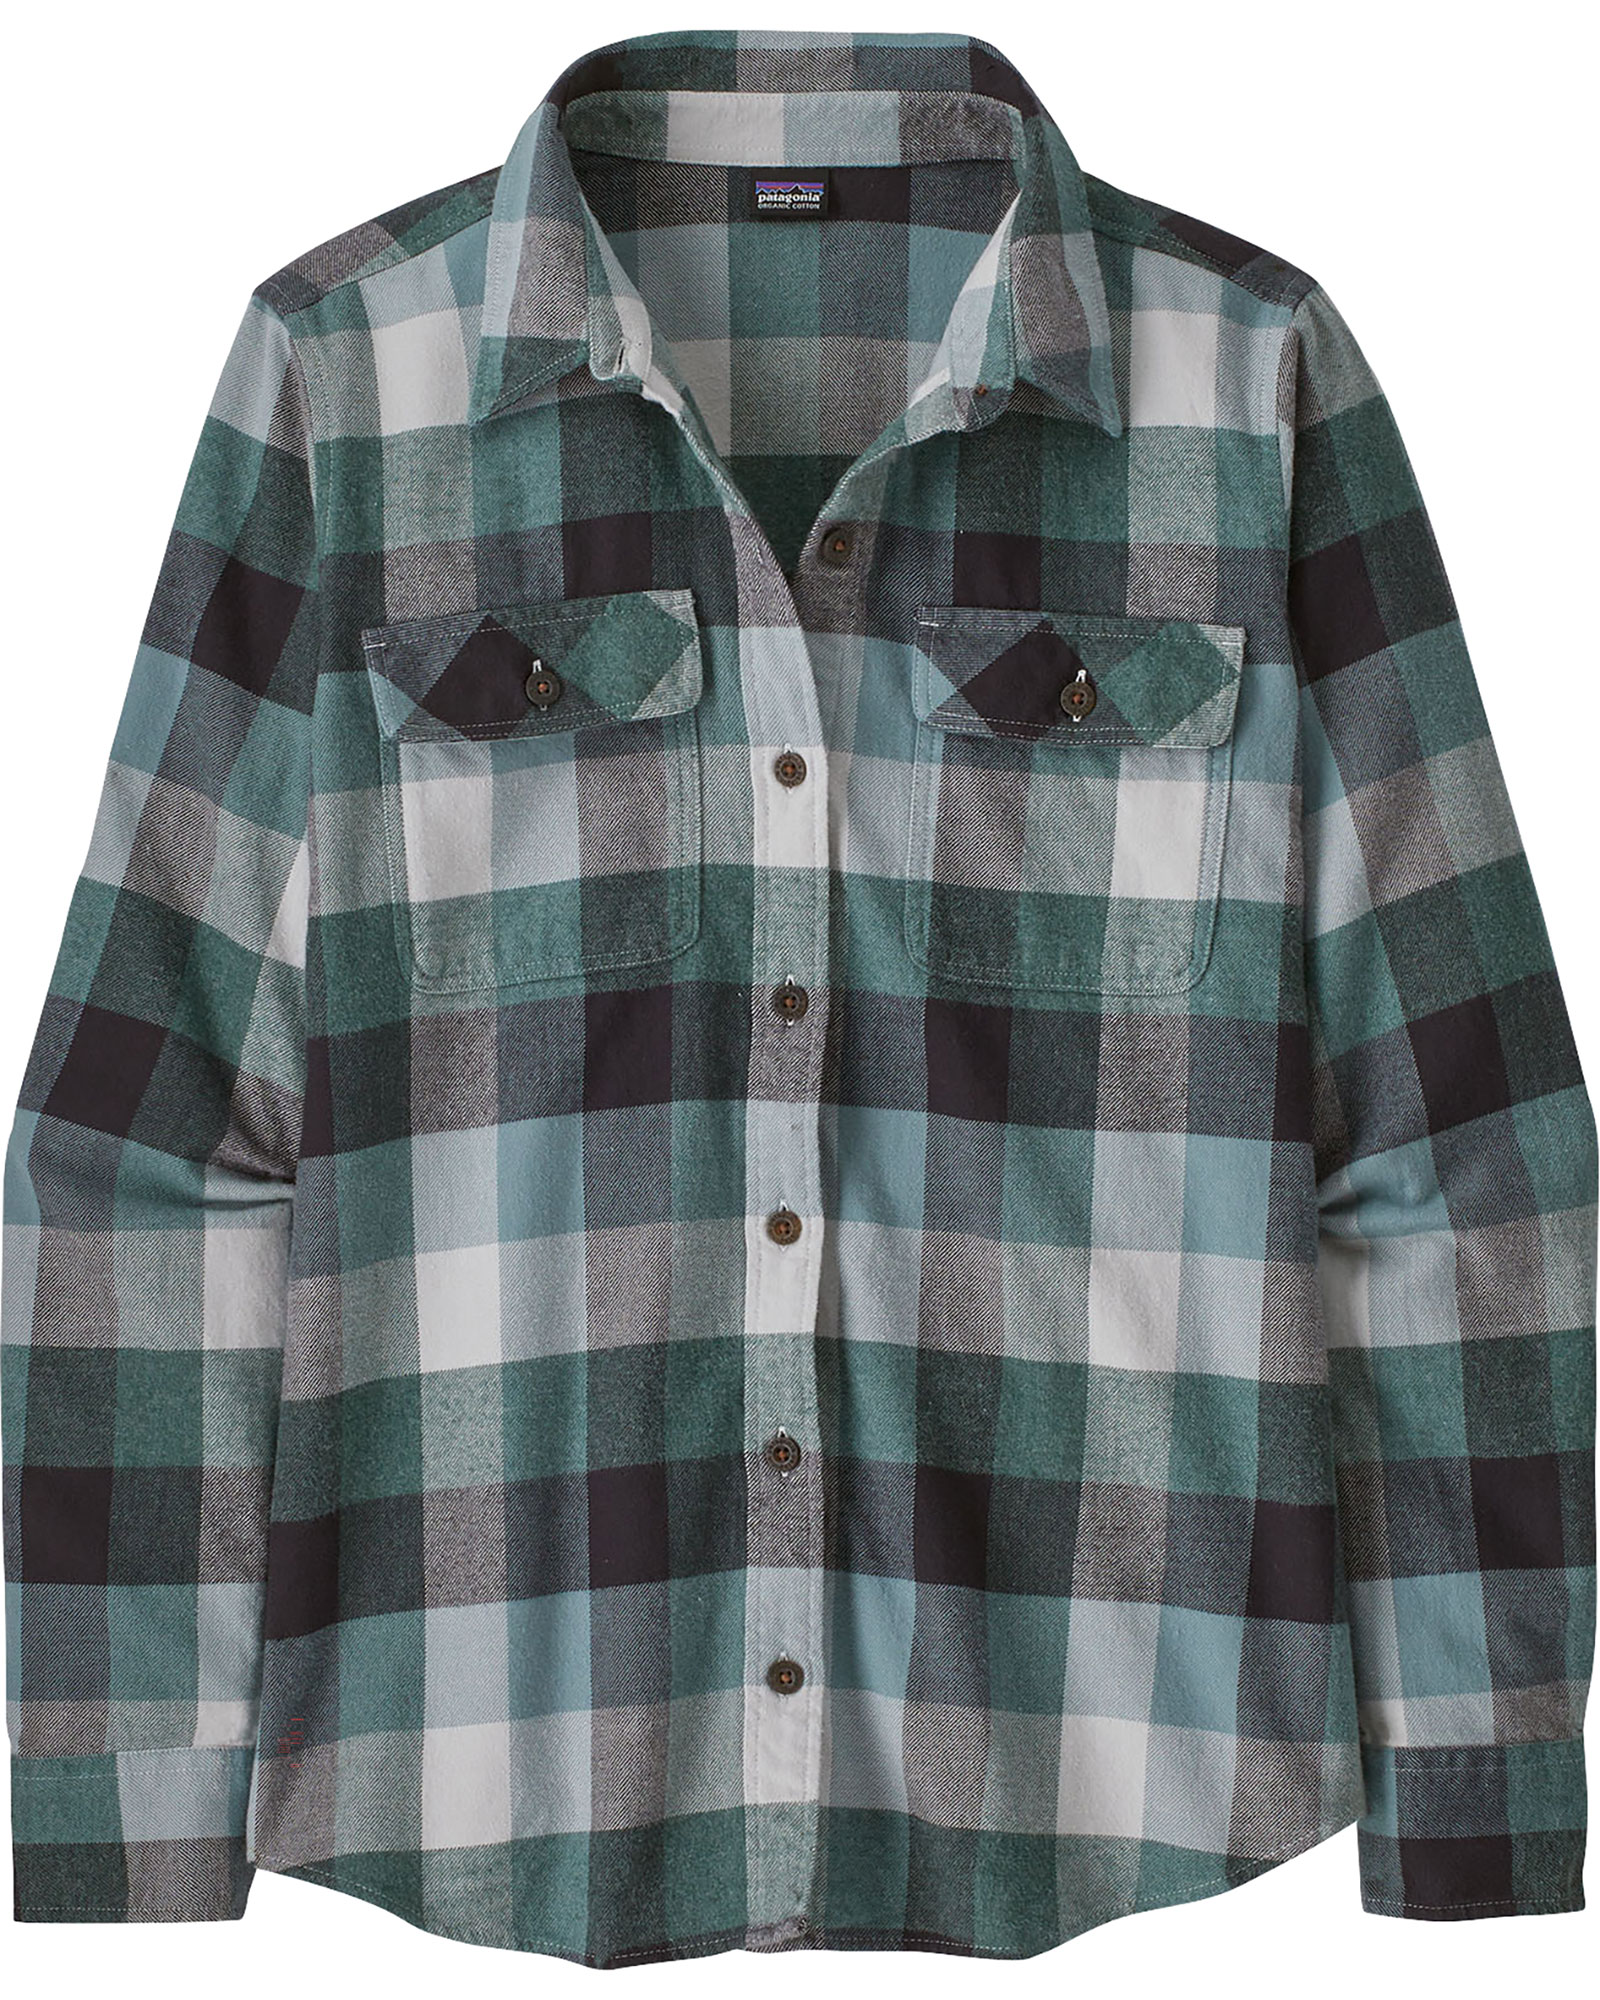 Patagonia Women’s Organic Cotton MW Fjord Flannel Long Sleeved Shirt - Guides: Nouveau Green XS